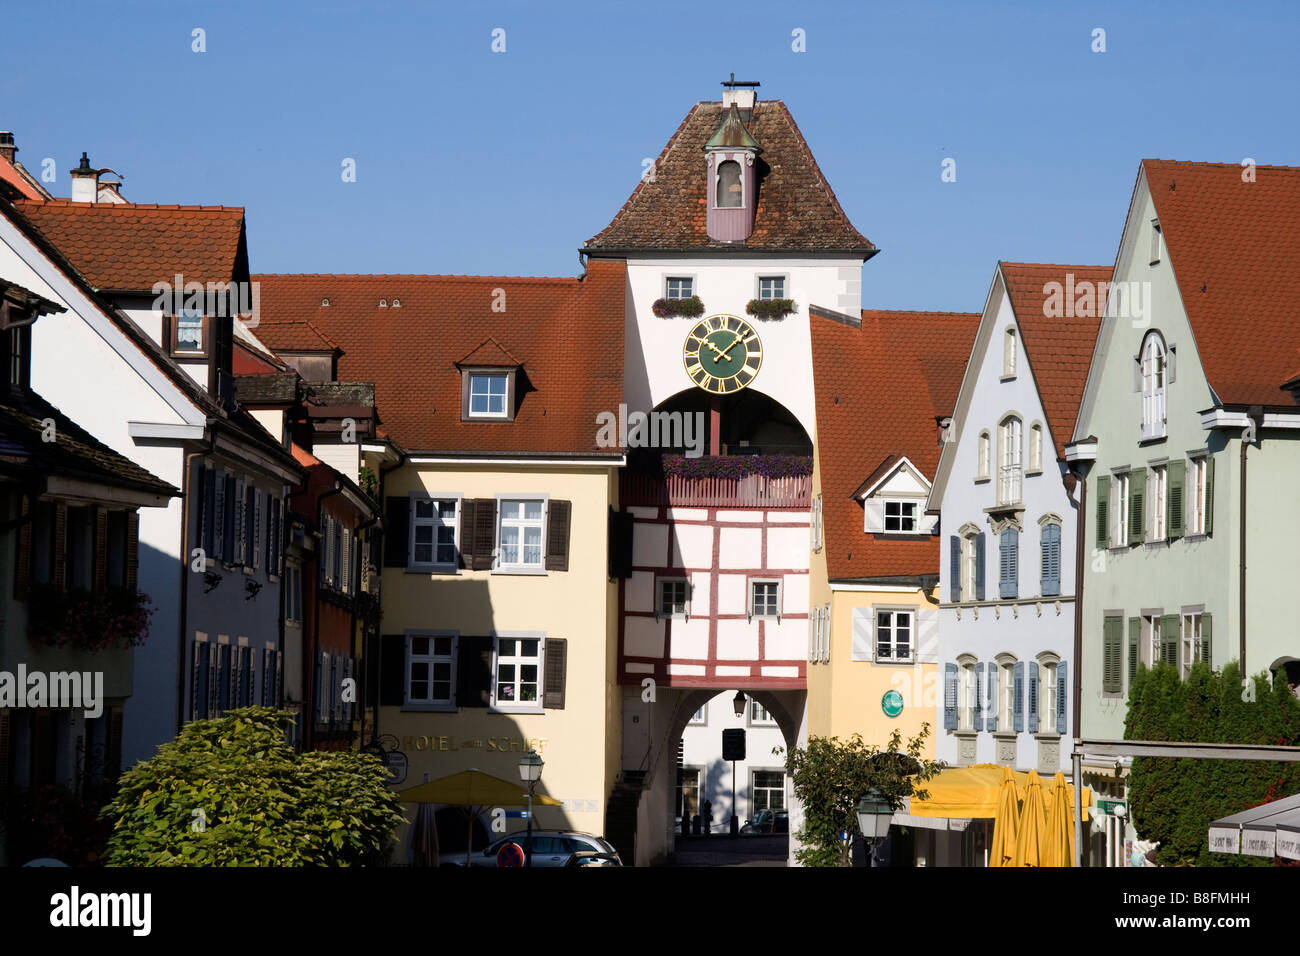 Old towngate in old part of town, Meersburg, Baden Wuerttemberg, Germany, Europe. Stock Photo